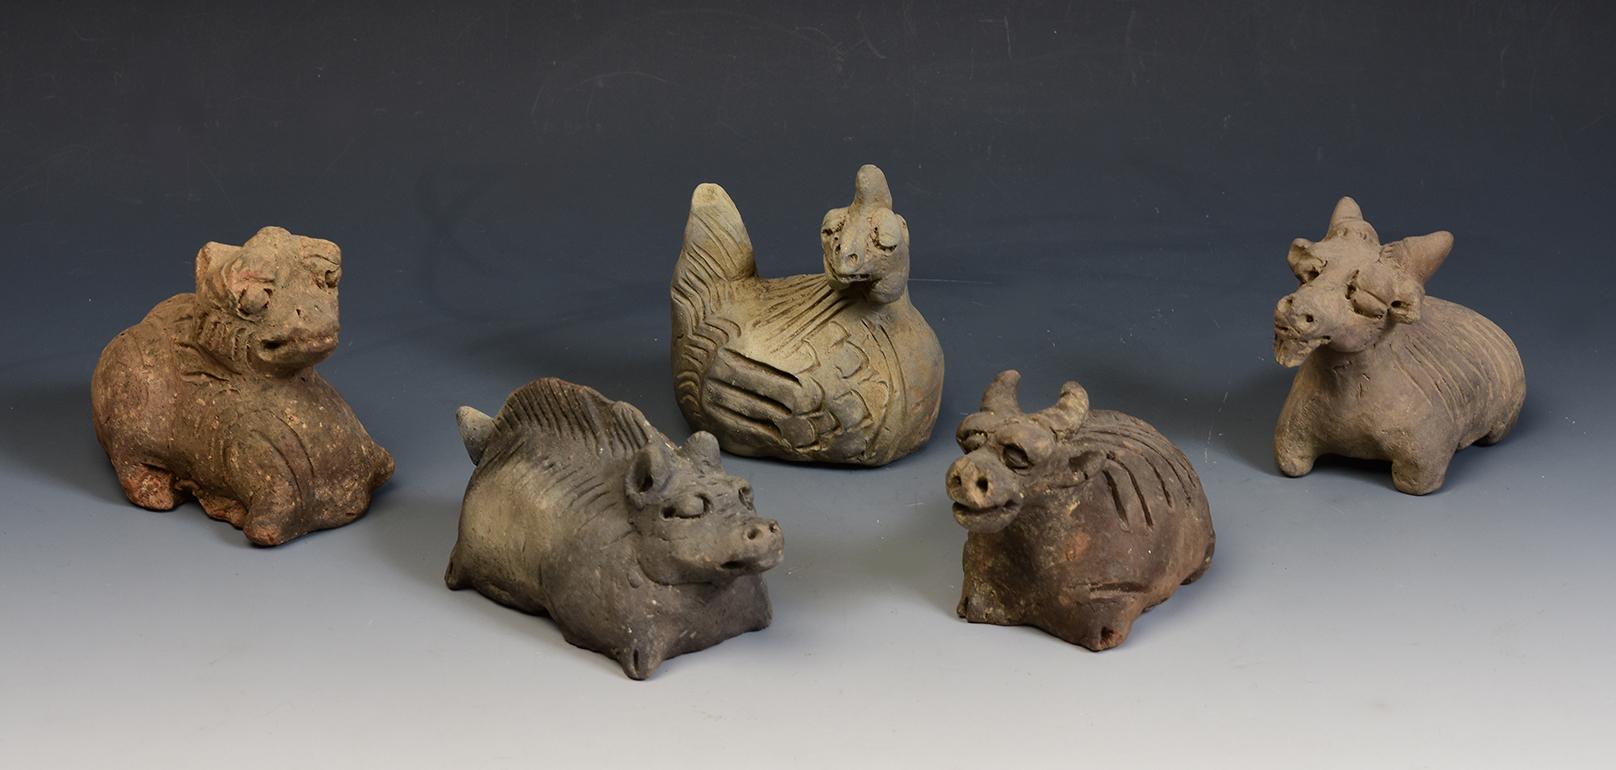 A set of rare Chinese pottery animals.

Age: China, Yuan Dynasty, A.D. 1271 - 1368
Size: Length 10.4 - 15.3 C.M. / Width 6 - 8.8 C.M. / Height 6.5 - 10.8 C.M.
Condition: Well-preserved old burial condition overall.

100% satisfaction and